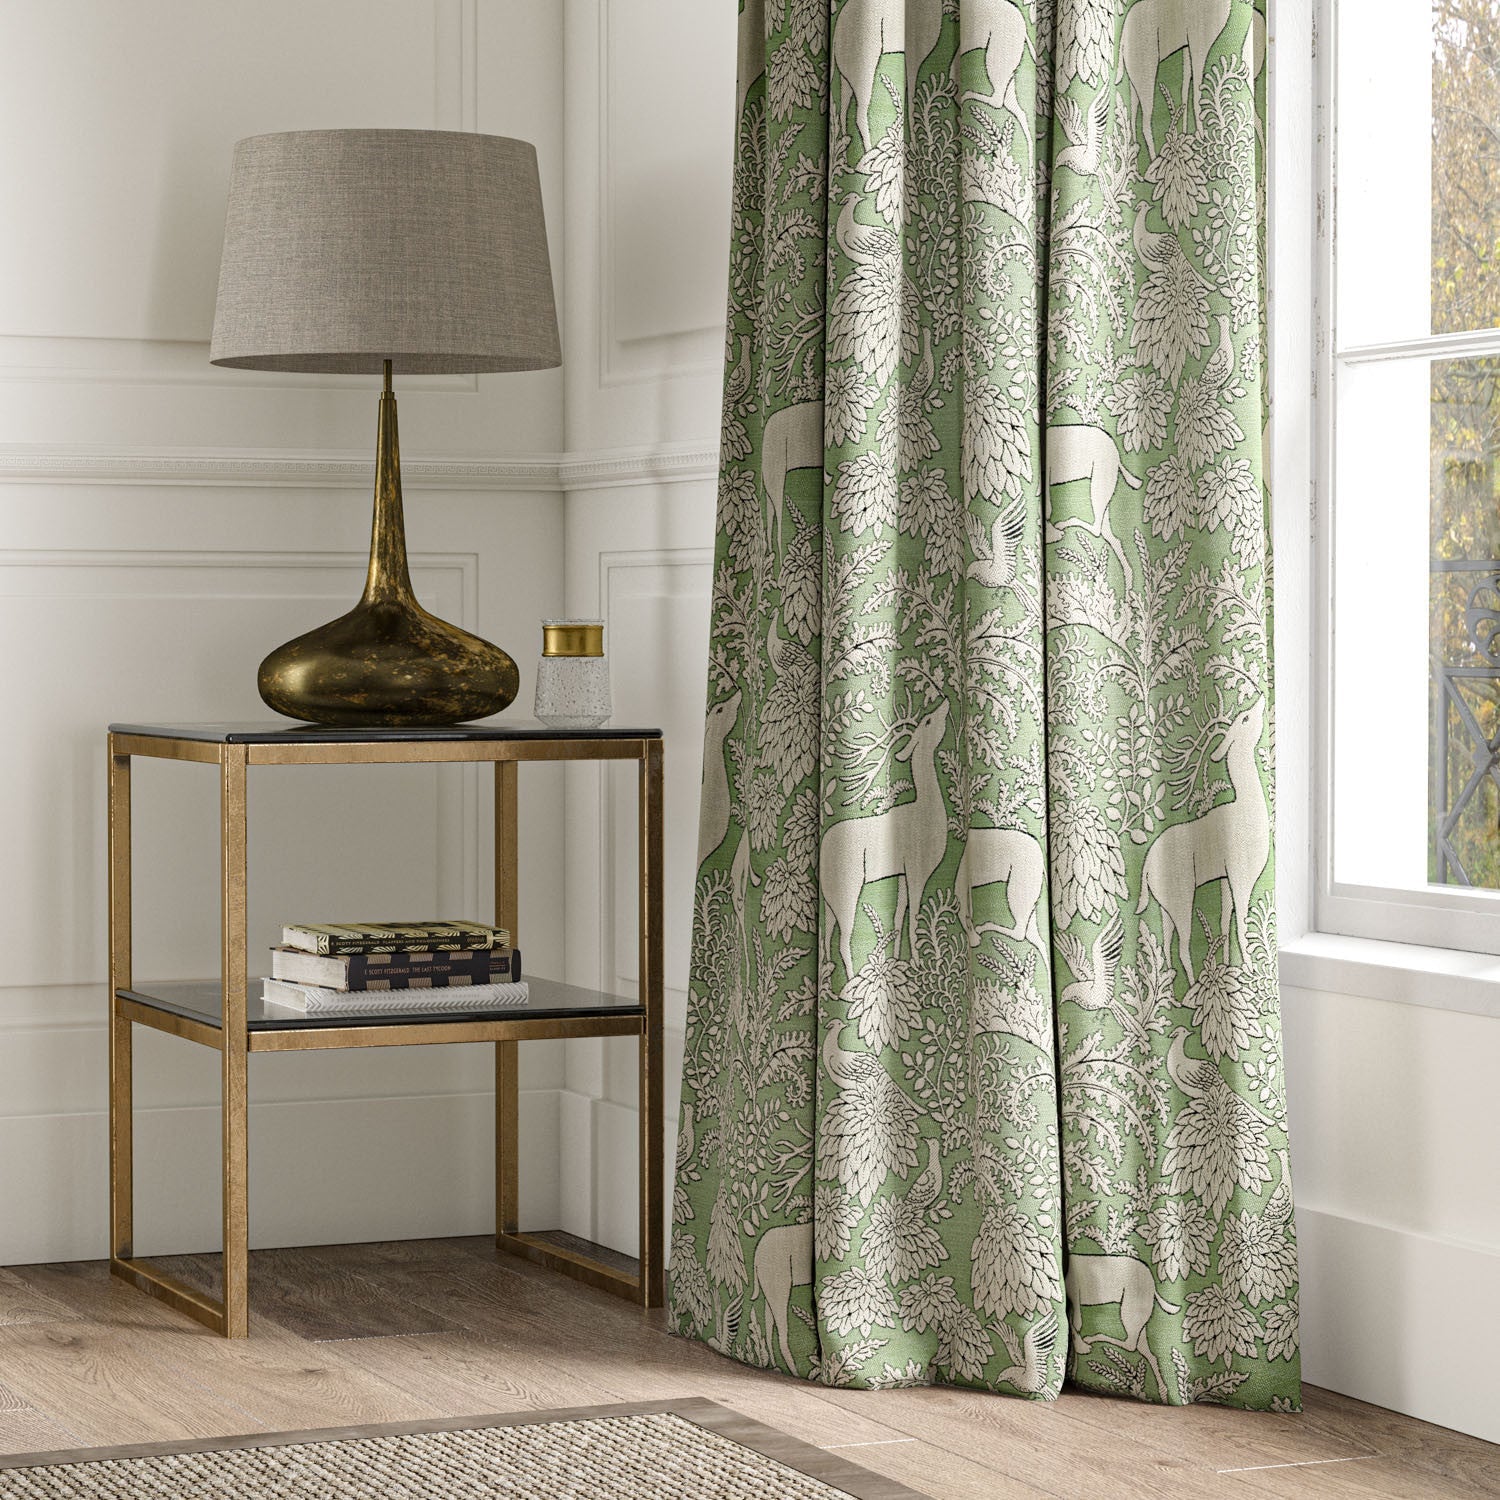 BALMORAL Olive Woven Fabric - Warner House